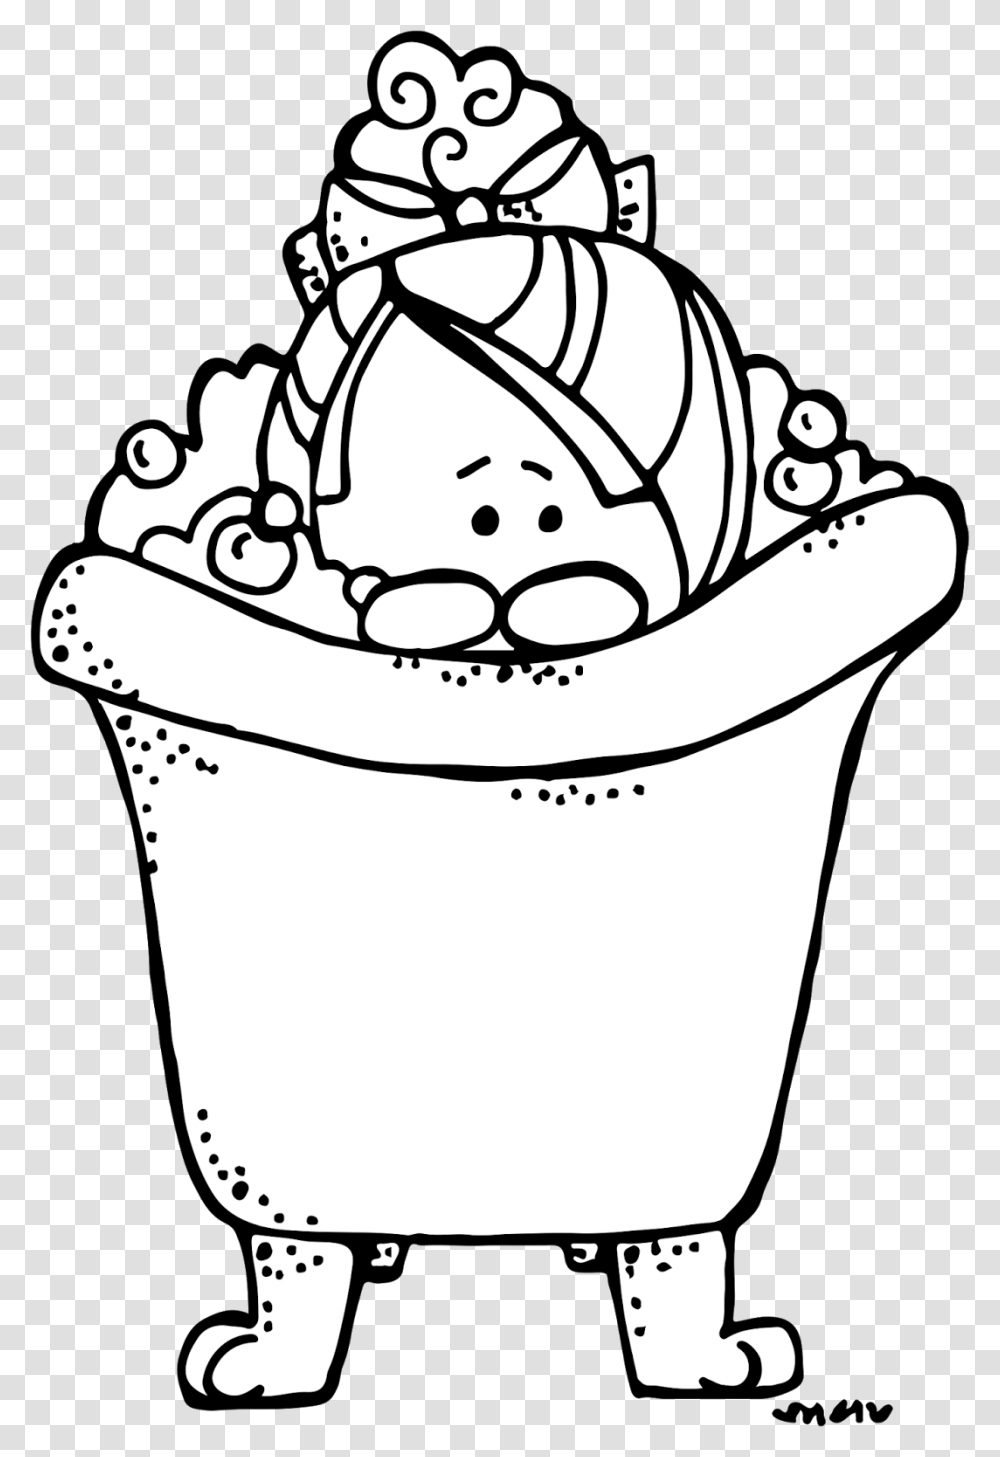 When I Grow Up I Want To Be An Illustrator Free Digital, Cream, Dessert, Food, Creme Transparent Png